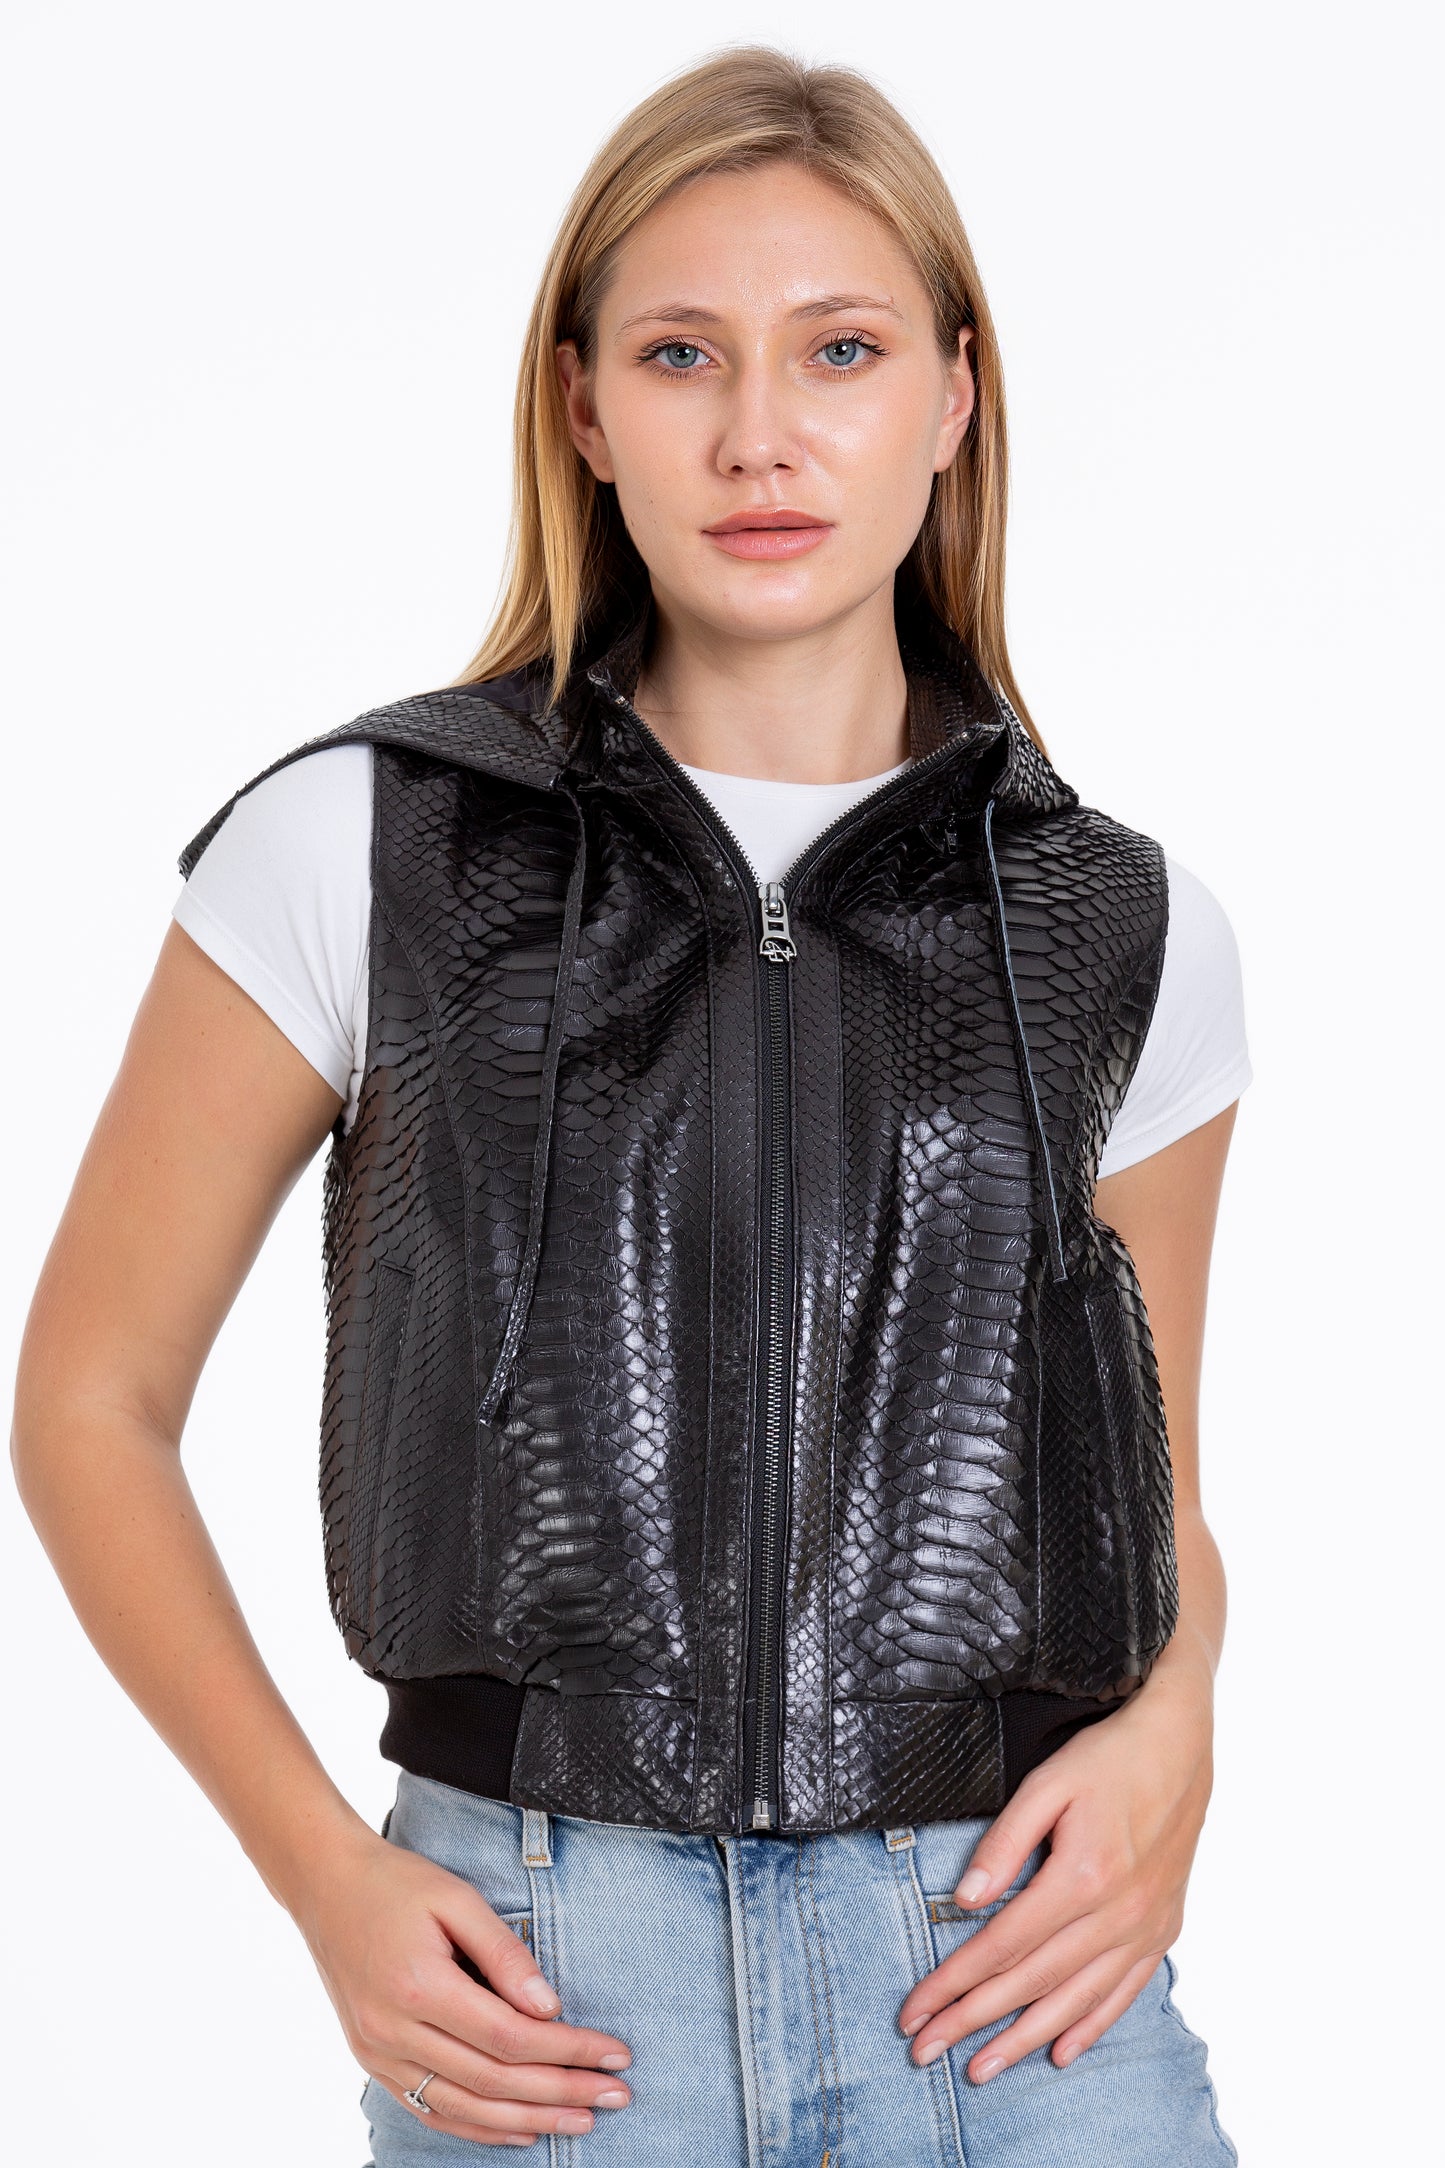 The Yanaka Pythn Skin Leather Black Zip-Up Vest with a Hood